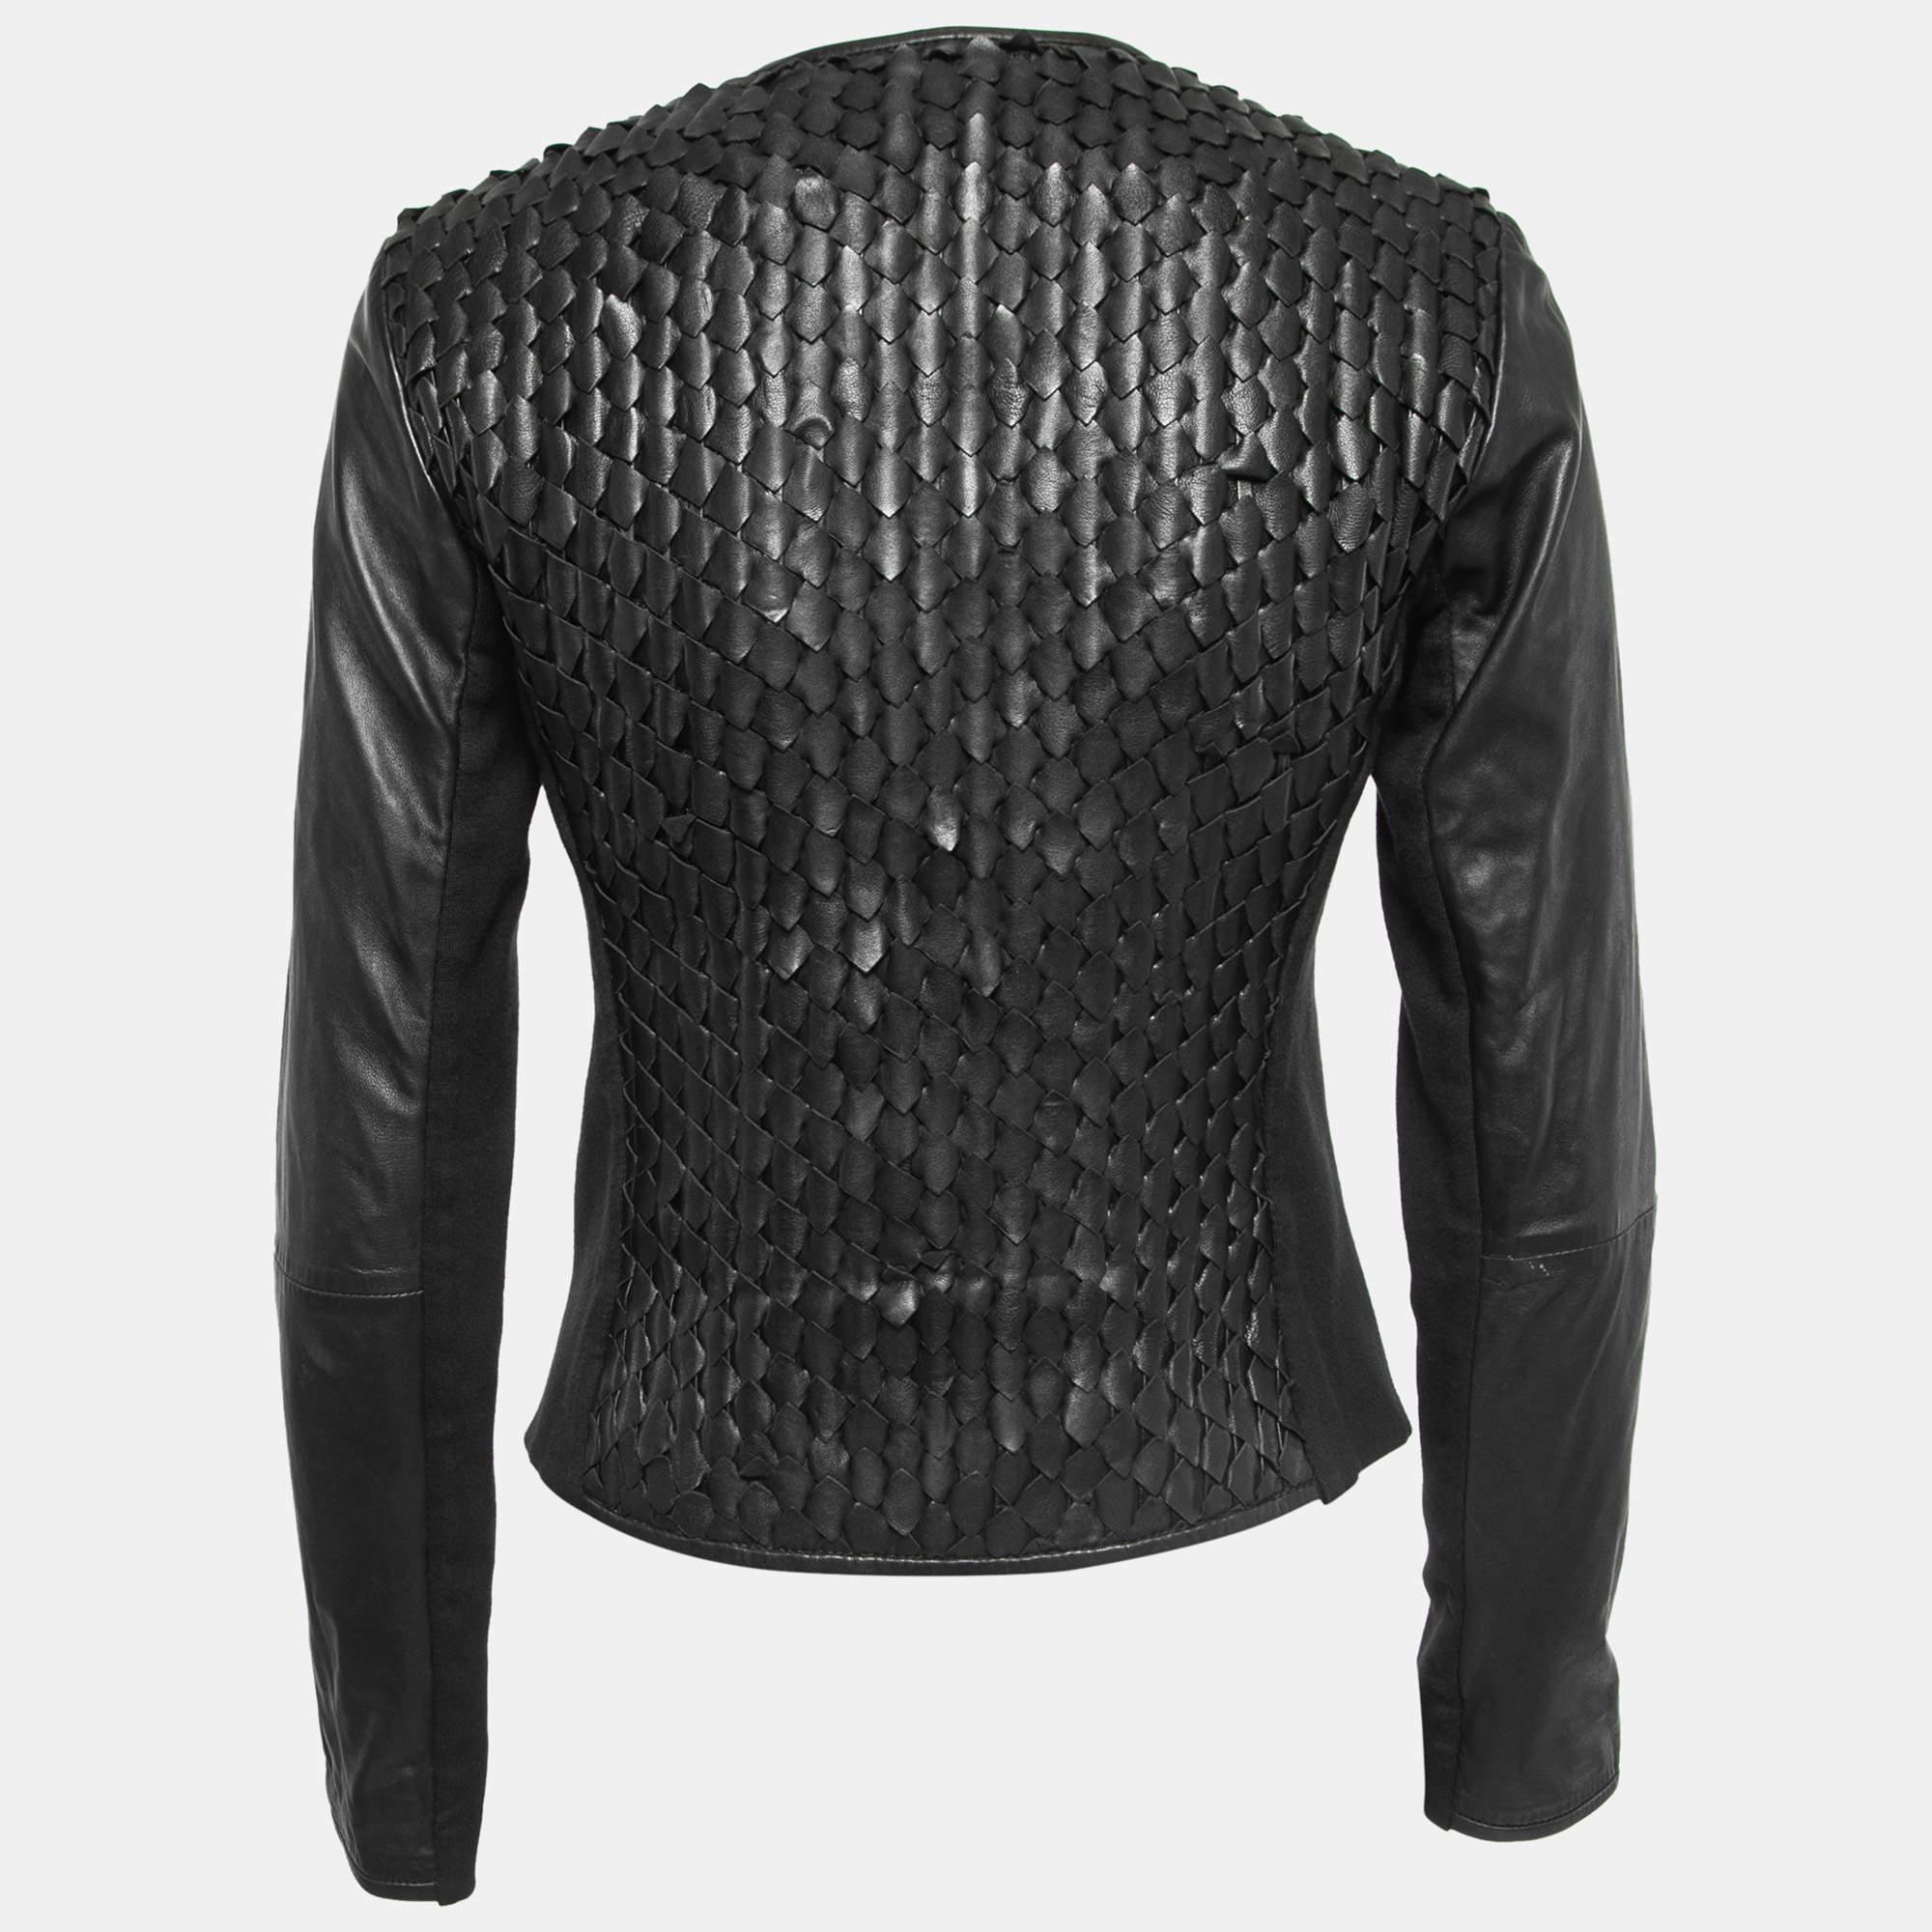 An elegant silhouette, smart fit, and perfect tailoring make this Emporio Armani leather jacket a fine choice. It is made of quality materials and secured with a front zip closure.

